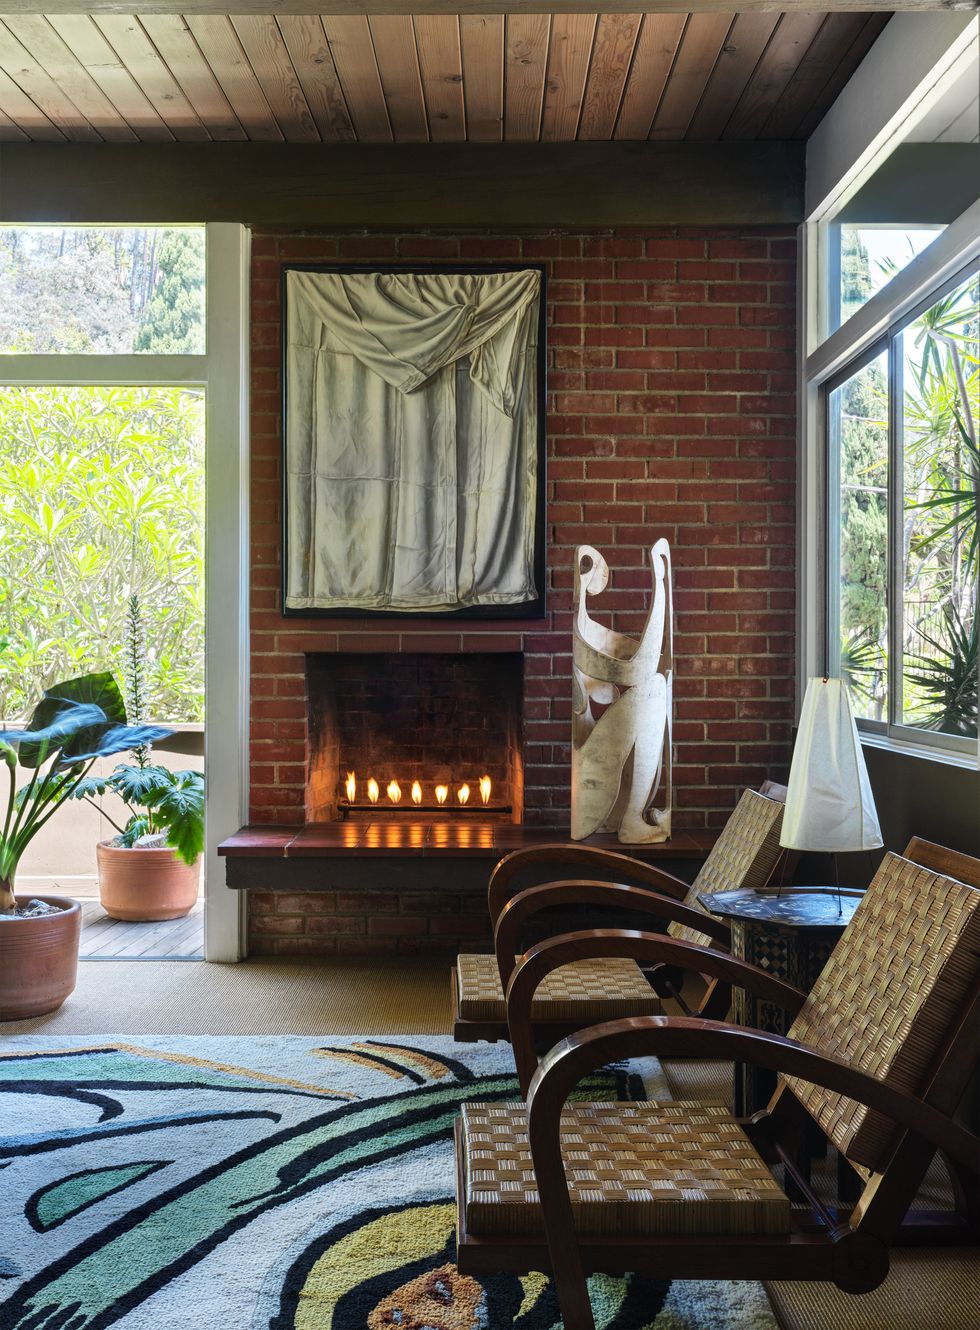 a family room has a brick wall with a fireplace and a painting, a standing paper sculpture, two vintage wood chairs with woven rush seats and backs, a colorful abstract rug, and a potted floor plant by a glass door